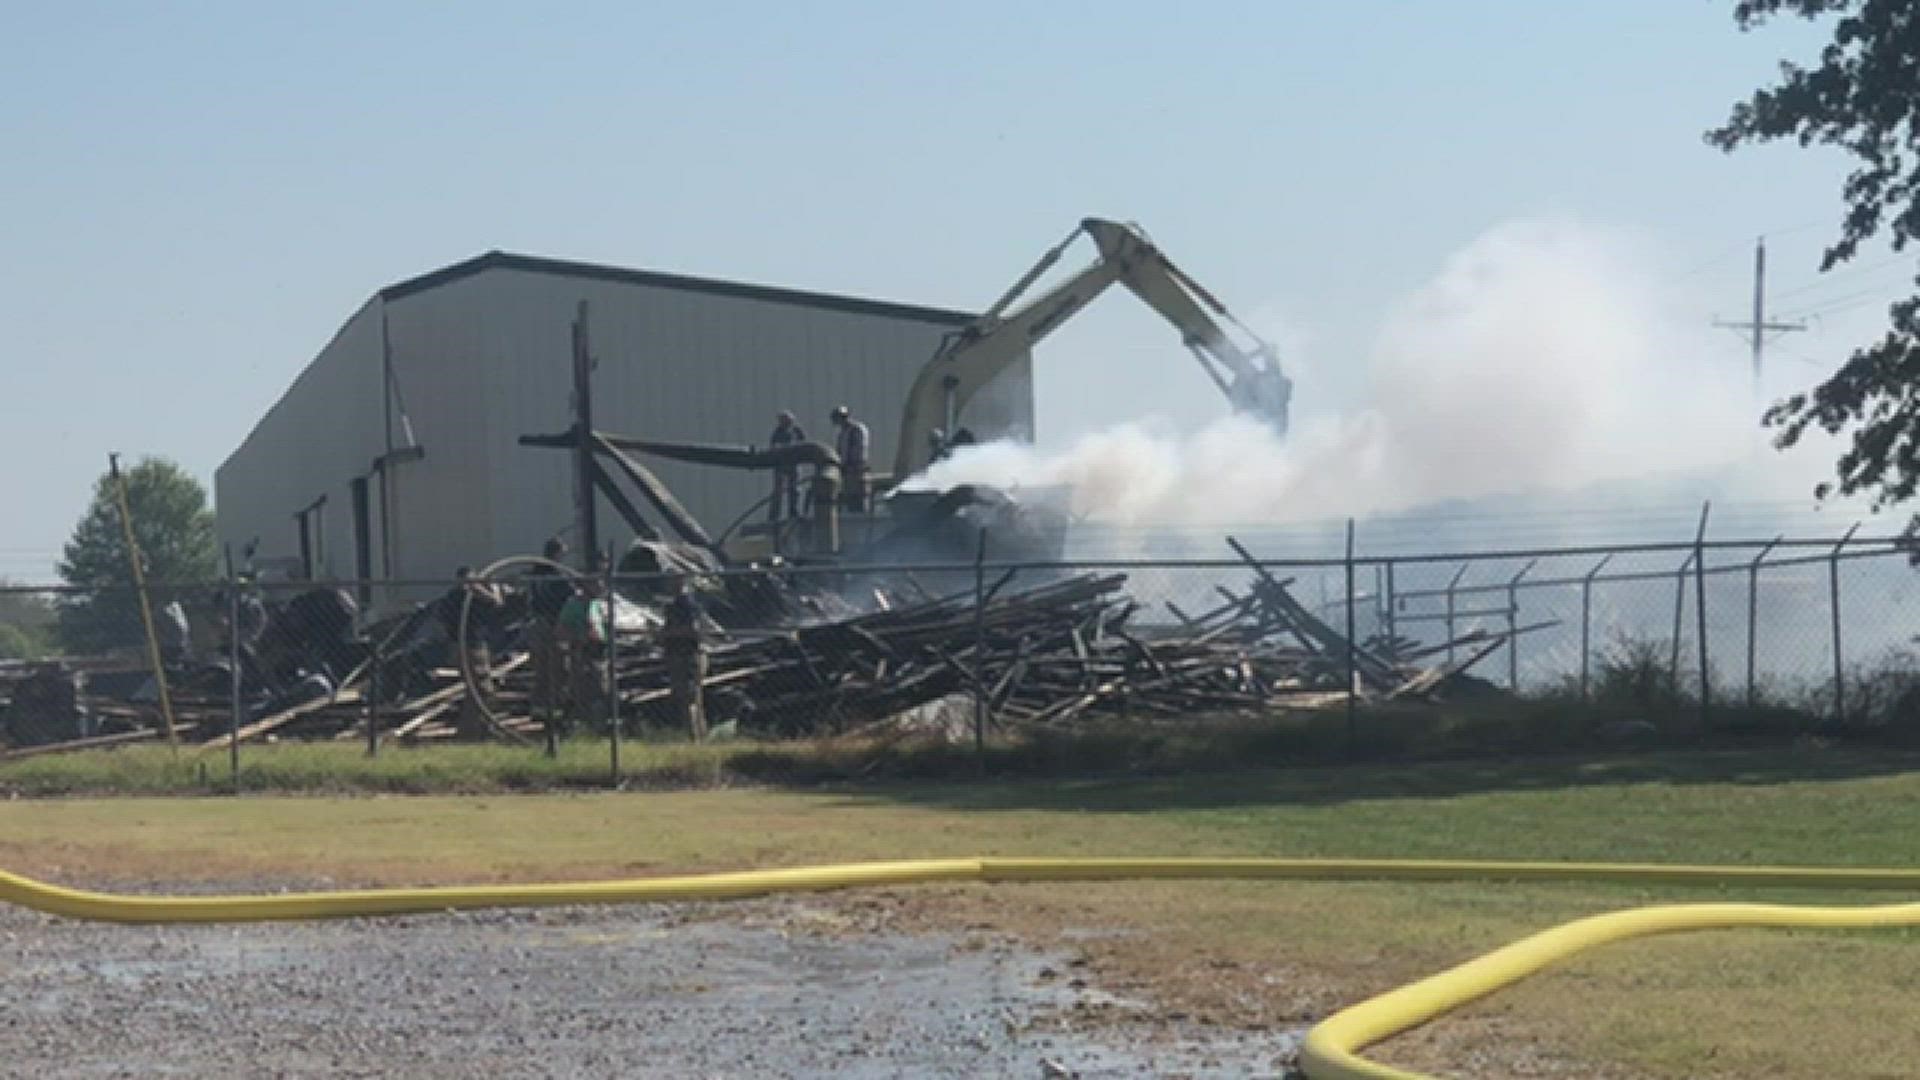 Fire crews respond to Lacto Truss warehouse fire in Lincoln, Ark.